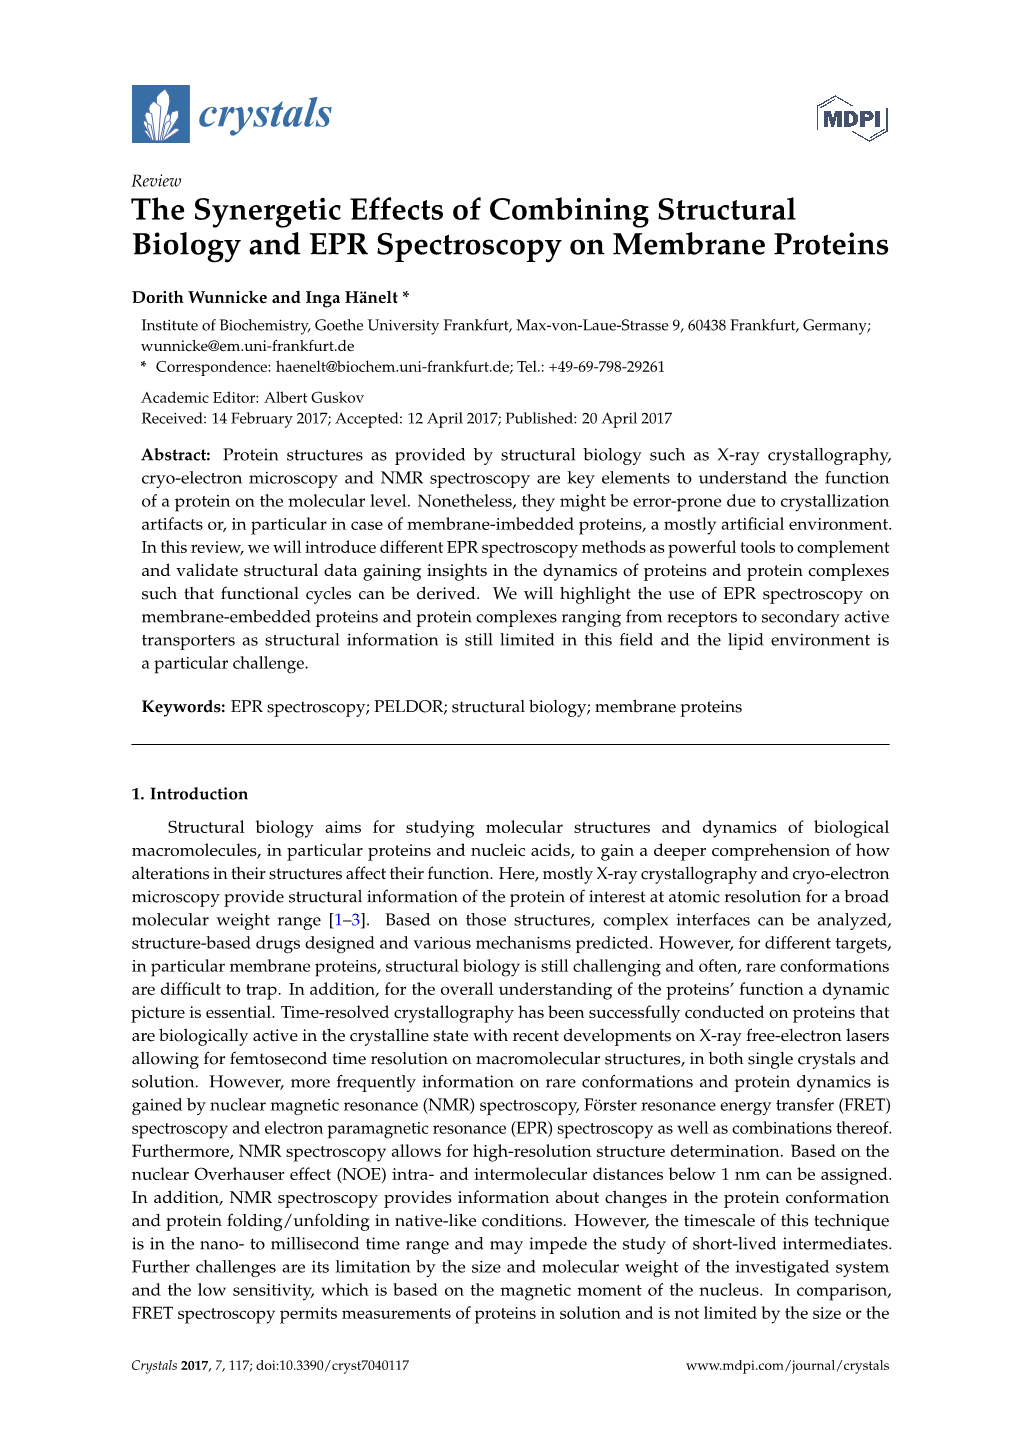 The Synergetic Effects of Combining Structural Biology and EPR Spectroscopy on Membrane Proteins